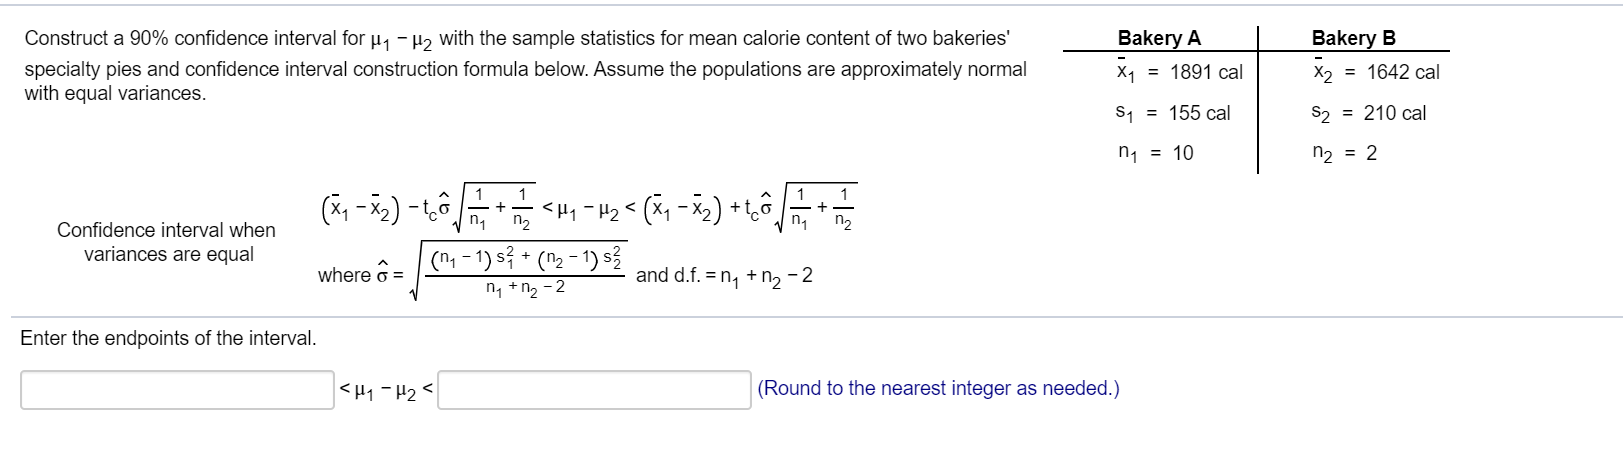 Construct a 90% confidence interval for u, -H2 with the sample statistics for mean calorie content of two bakeries'
Bak
specialty pies and confidence interval construction formula below. Assume the populations are approximately normal
with equal variances.
X1 =
S, =
n1
1
<
Confidence interval when
n2
n2
variances are equal
(1 - 1) s? + (n2 - 1) s?
where ô =
and d.f. = n, +n, - 2
n, +n2 - 2
